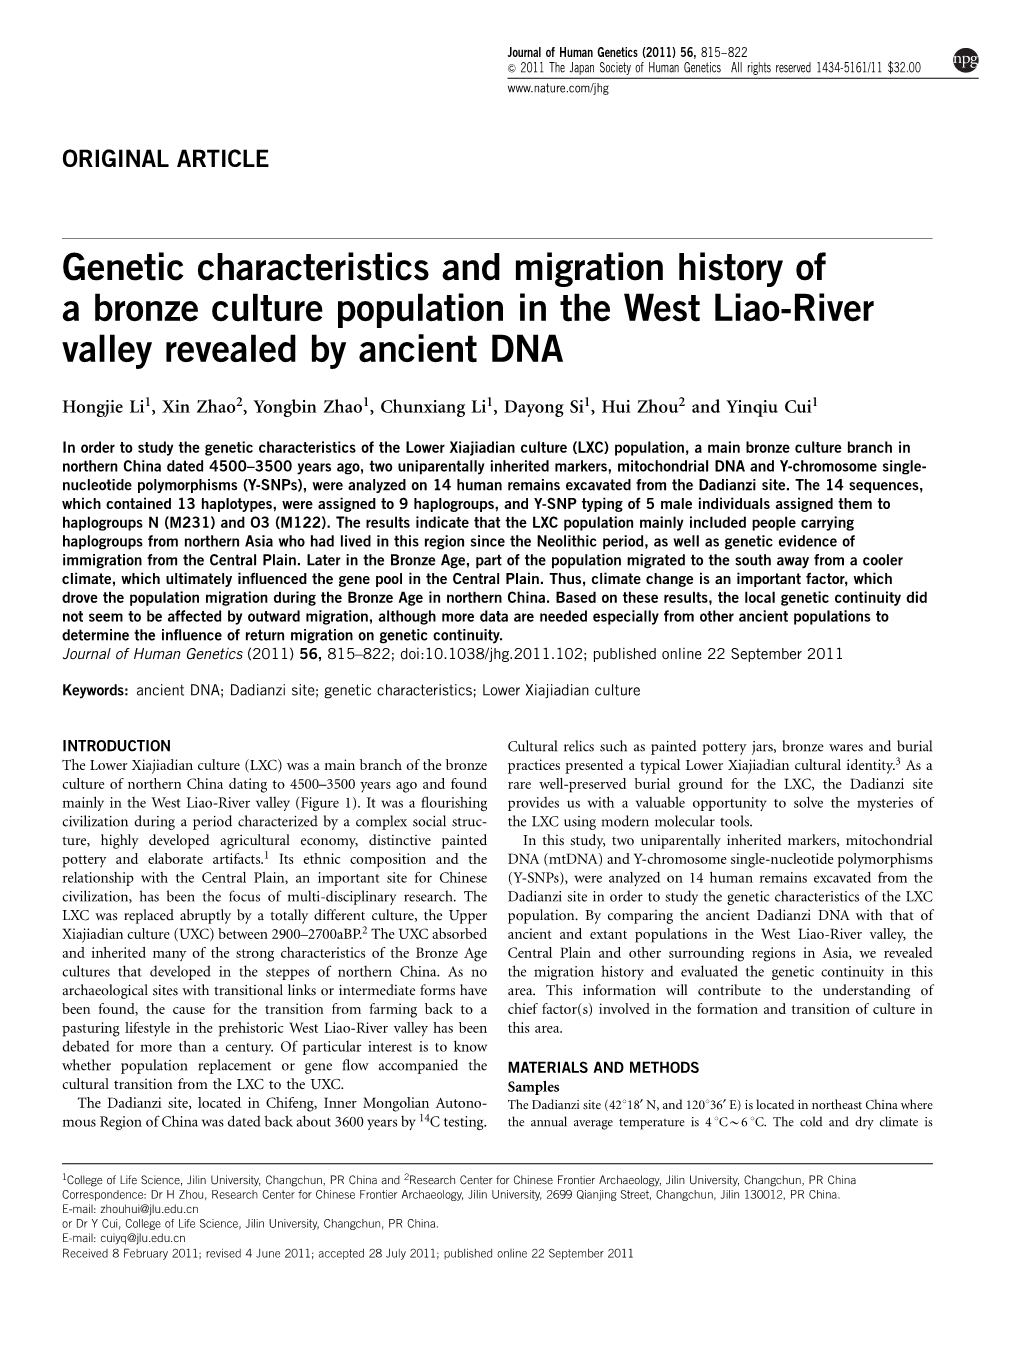 Genetic Characteristics and Migration History of a Bronze Culture Population in the West Liao-River Valley Revealed by Ancient DNA